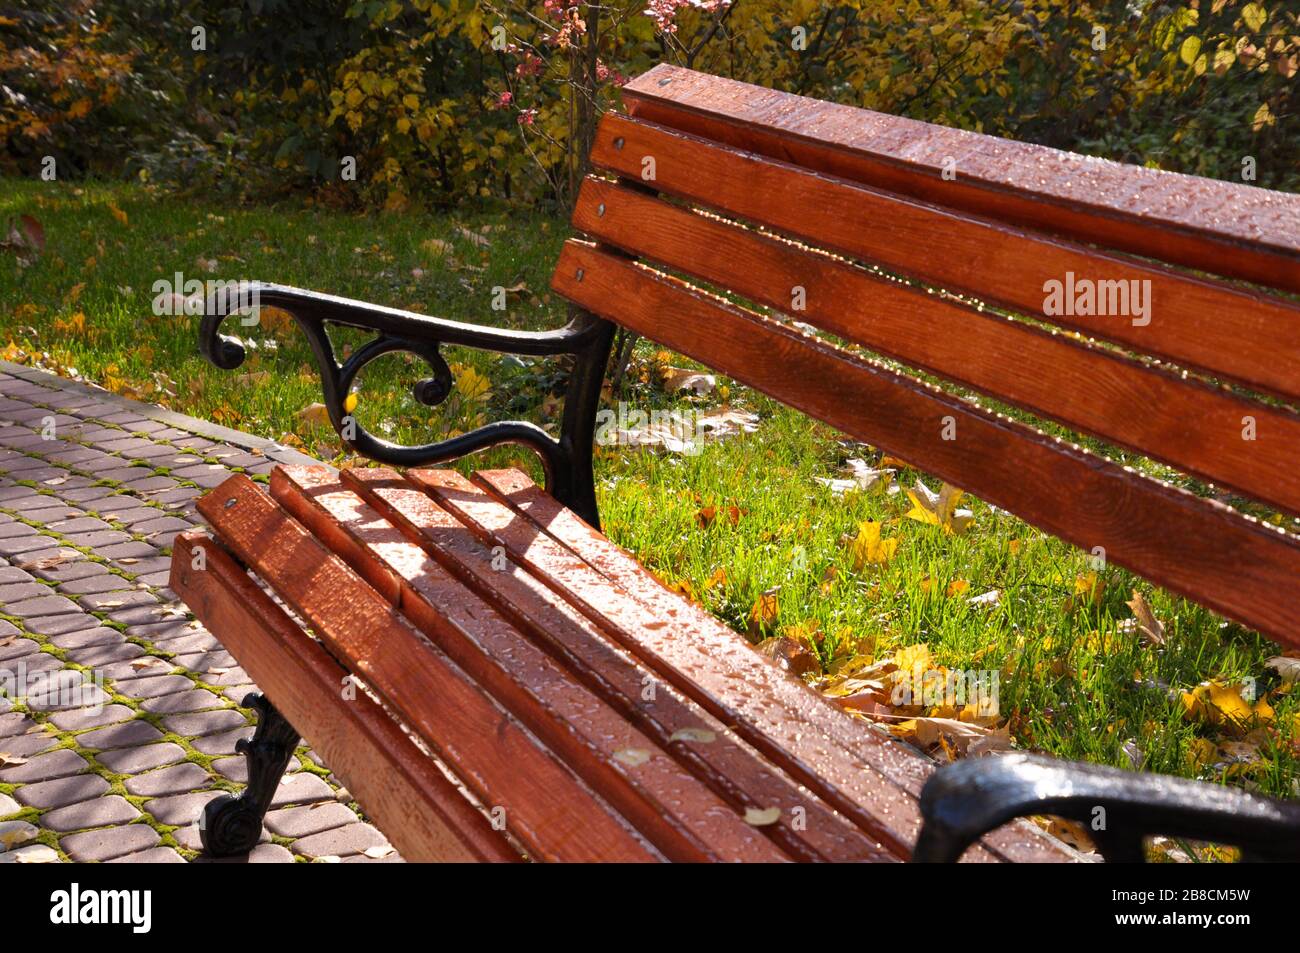 Bench in park after the rain with water drops and some leaves on seat and background with grass and fallen leaves.  October morning. Stock Photo